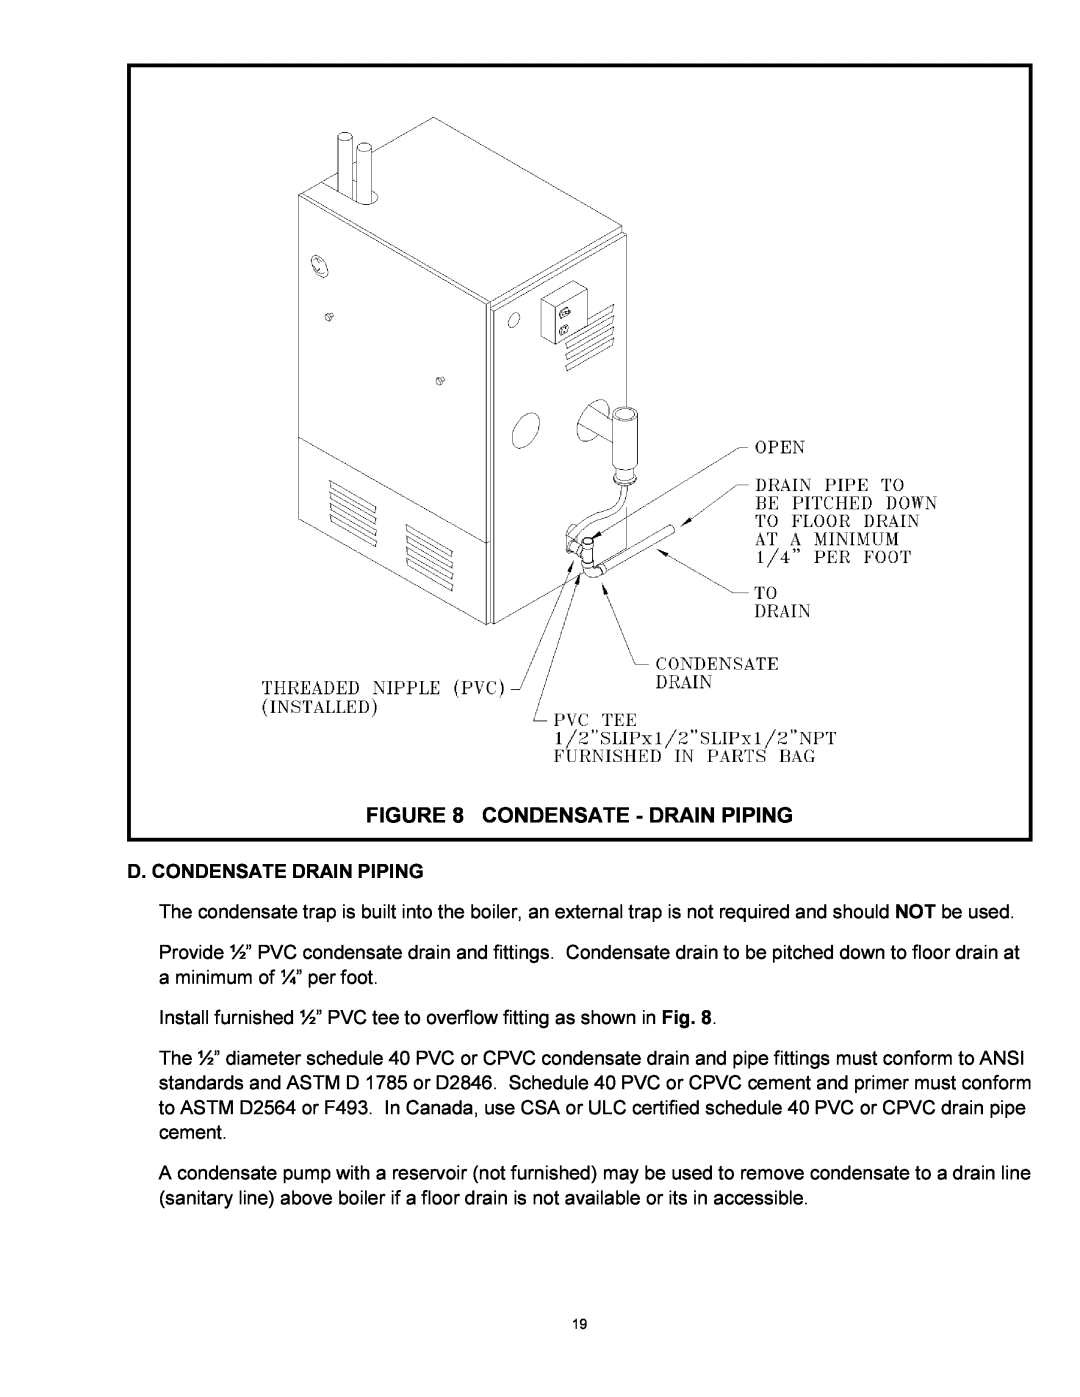 Quantum GAS-FIRED BOILERS installation instructions Condensate - Drain Piping, D. Condensate Drain Piping 